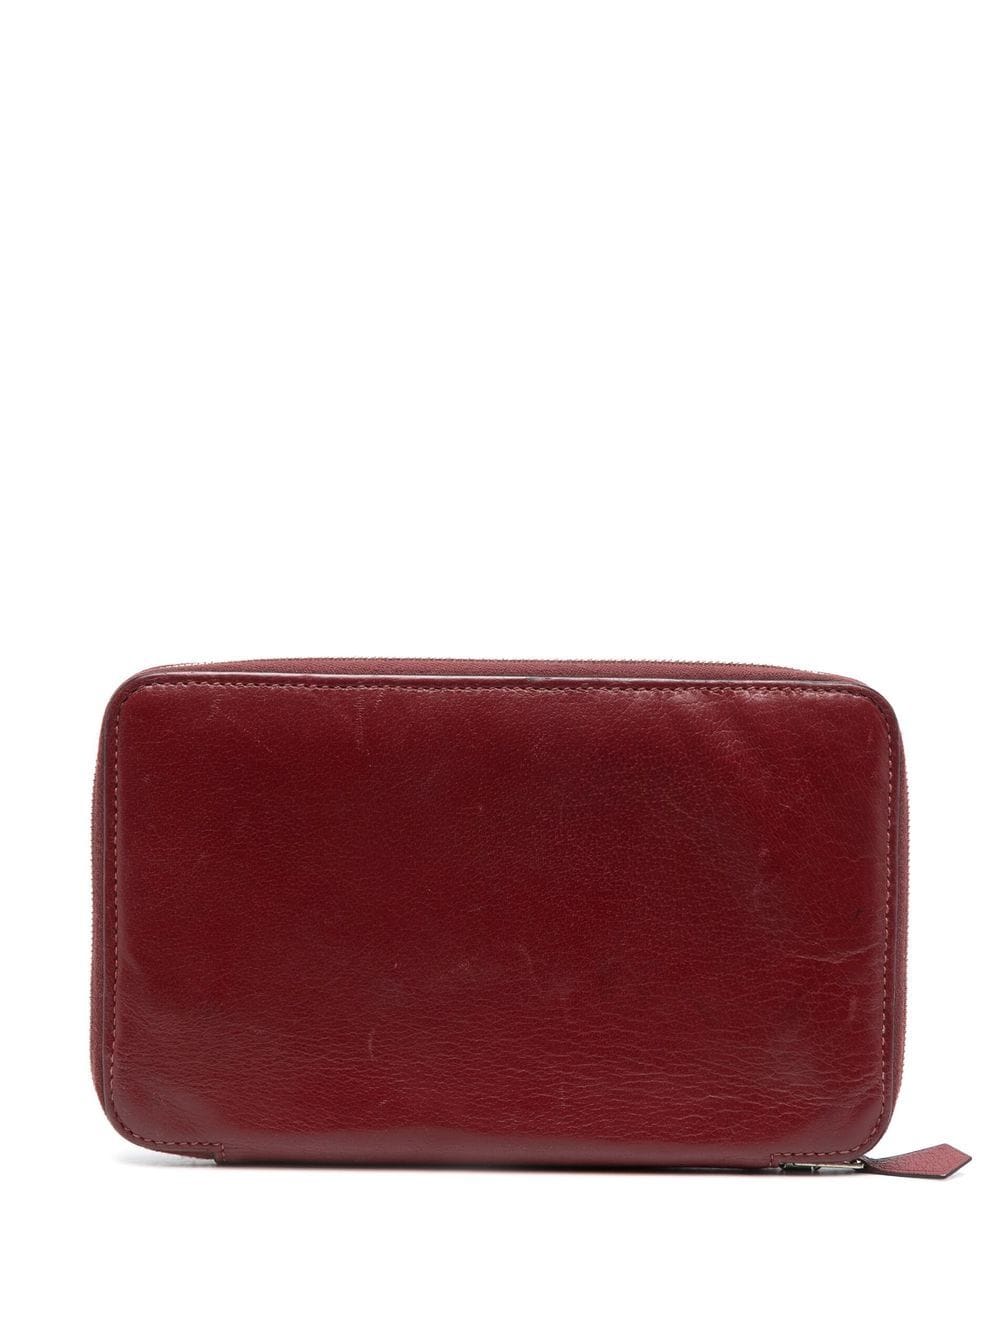 Image 2 of Hermès Pre-Owned 2010 Azap zipped wallet